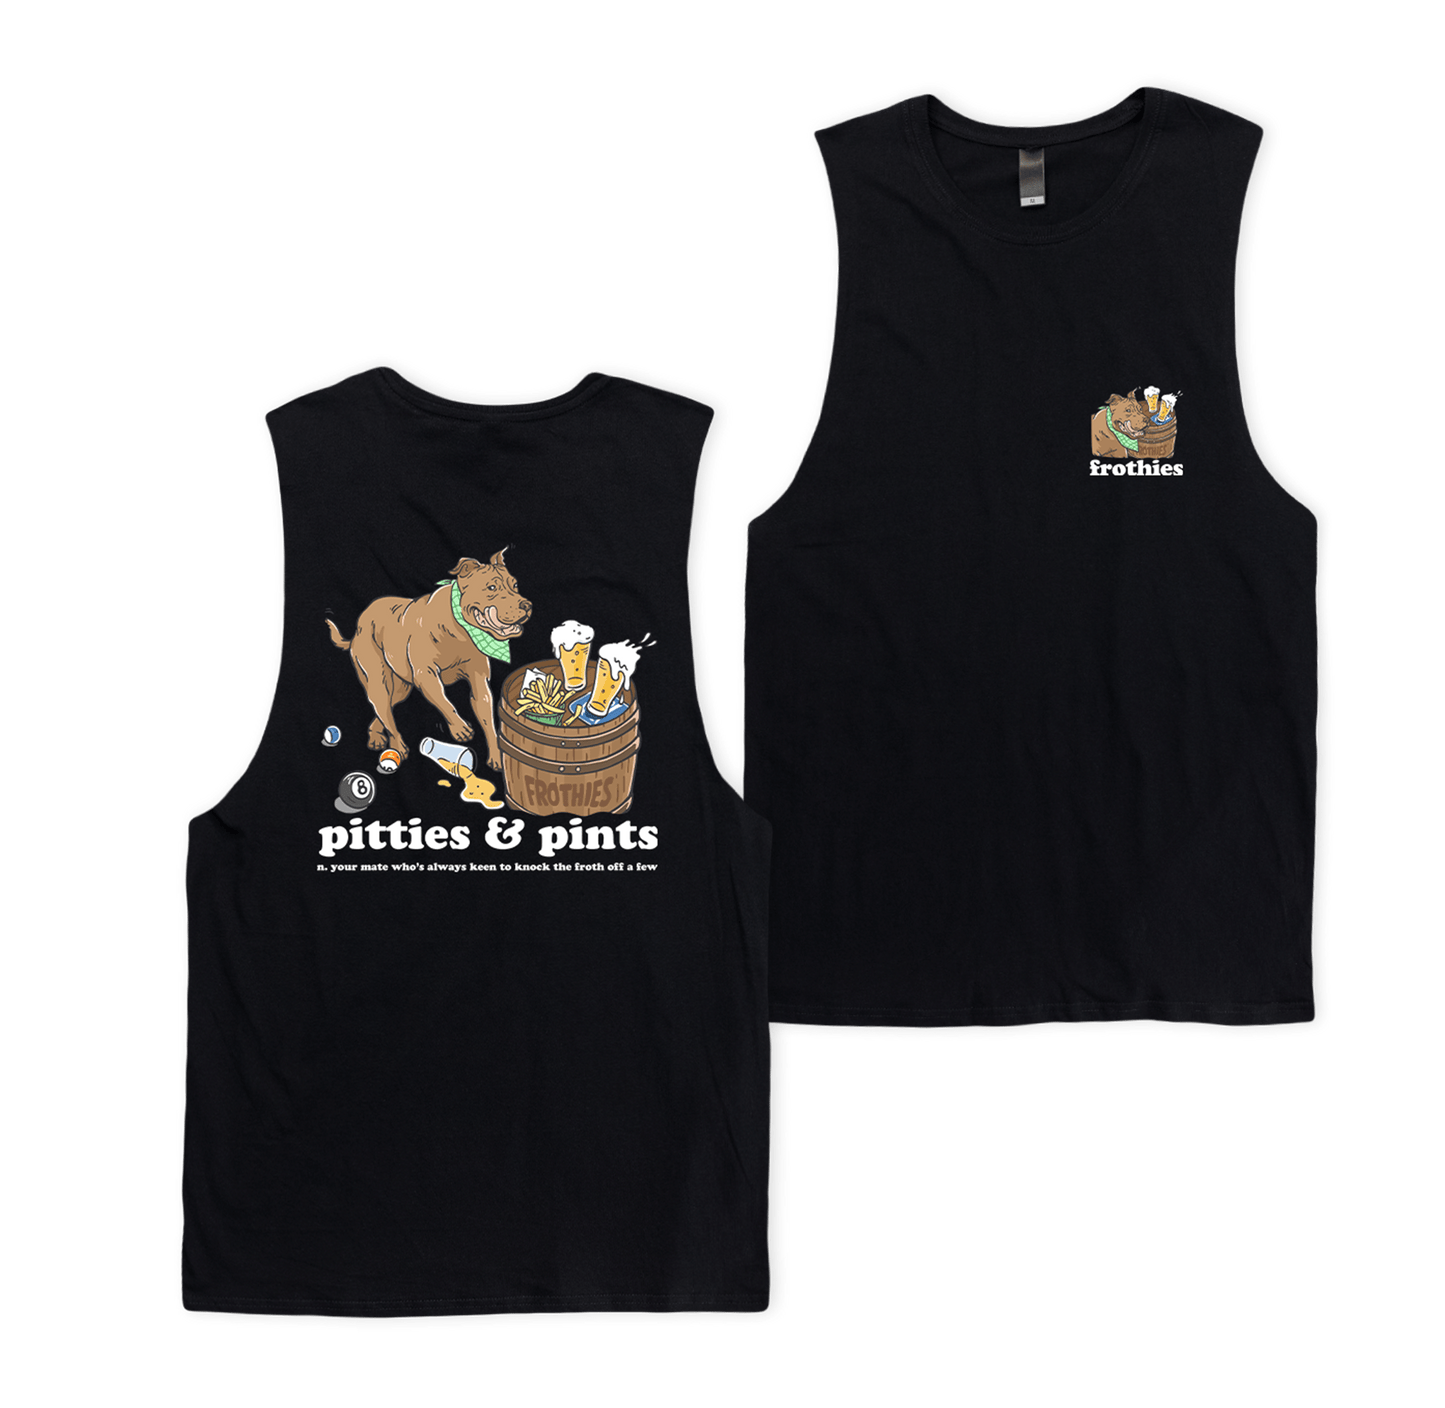 Pitties & Pints Muscle Tee Tshirts Frothies